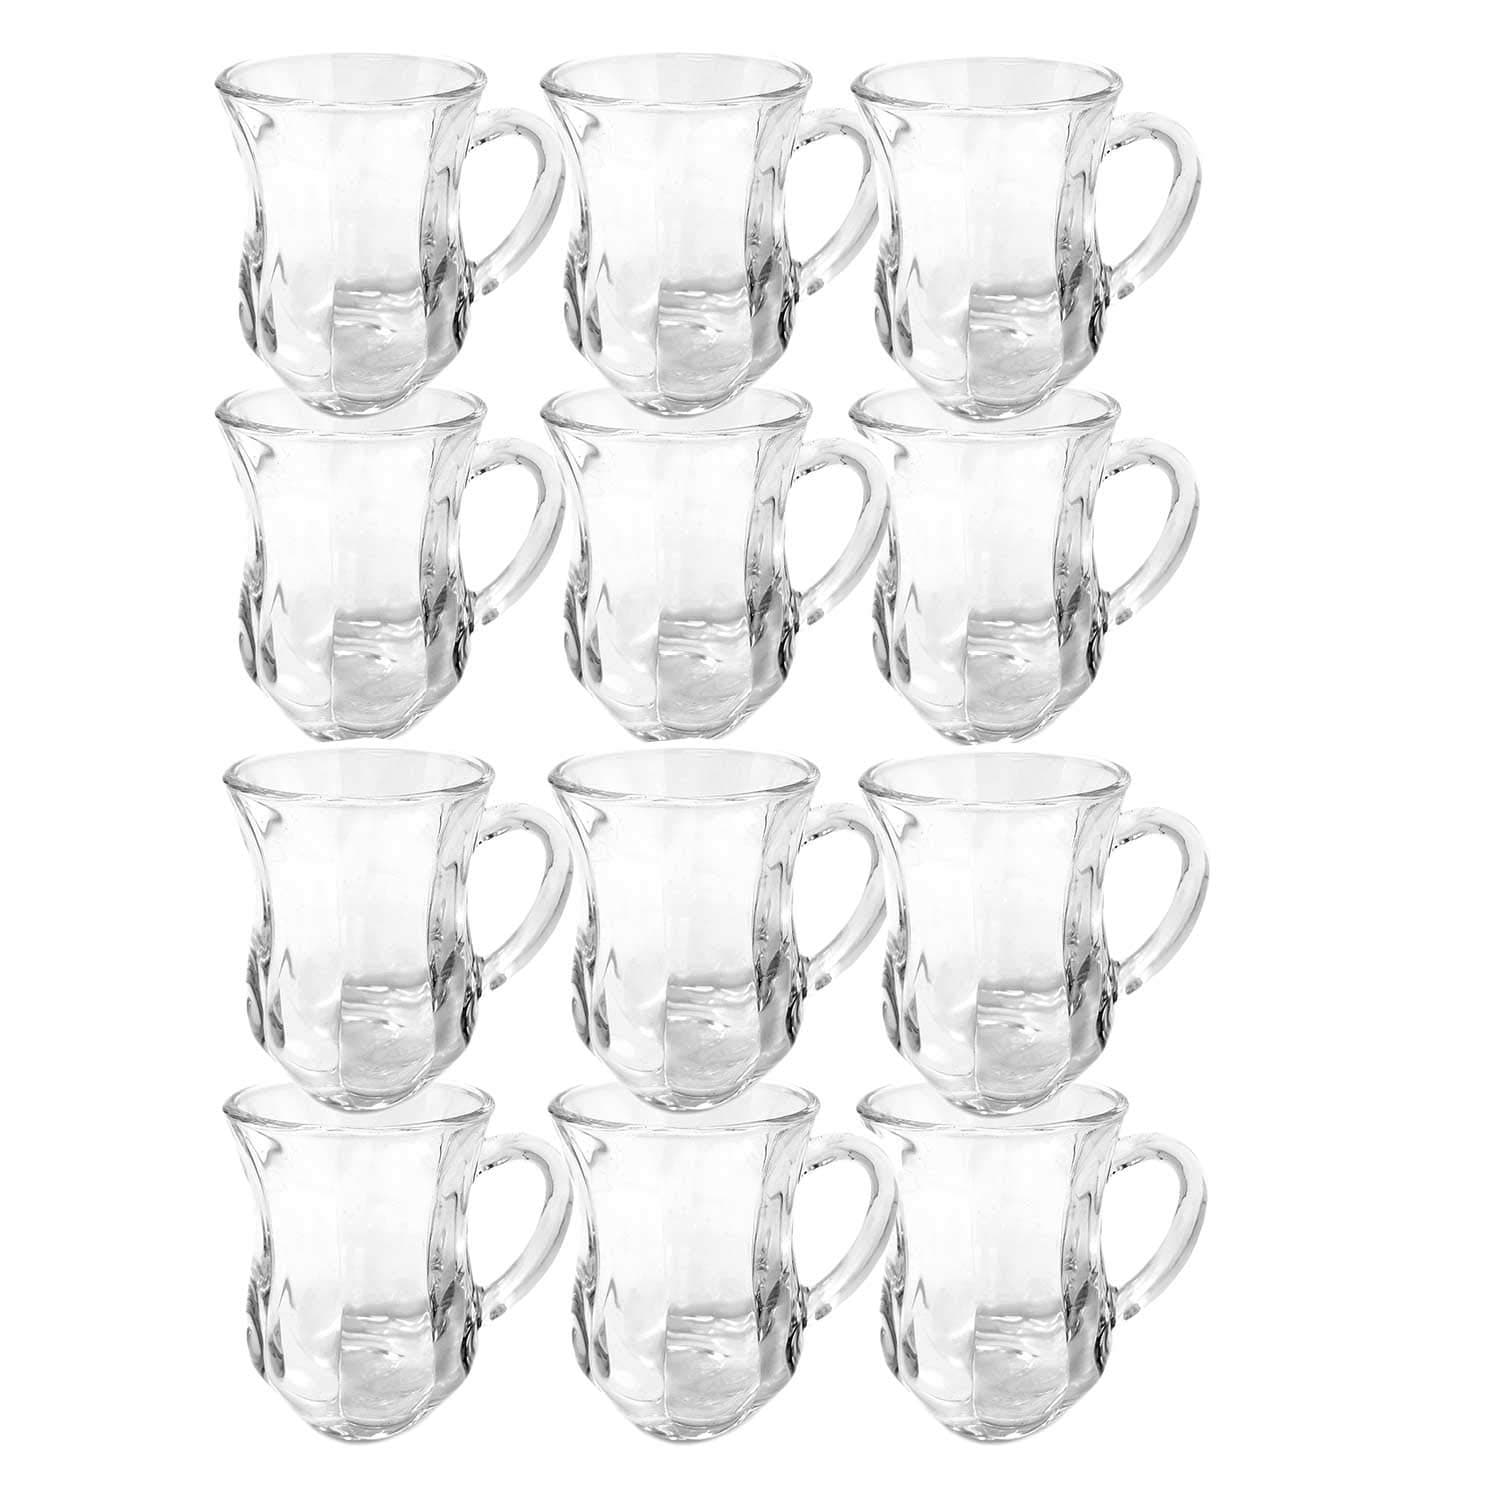 Somil New Design & Style Glass Tea Cup Set Of 6 Model No-b32